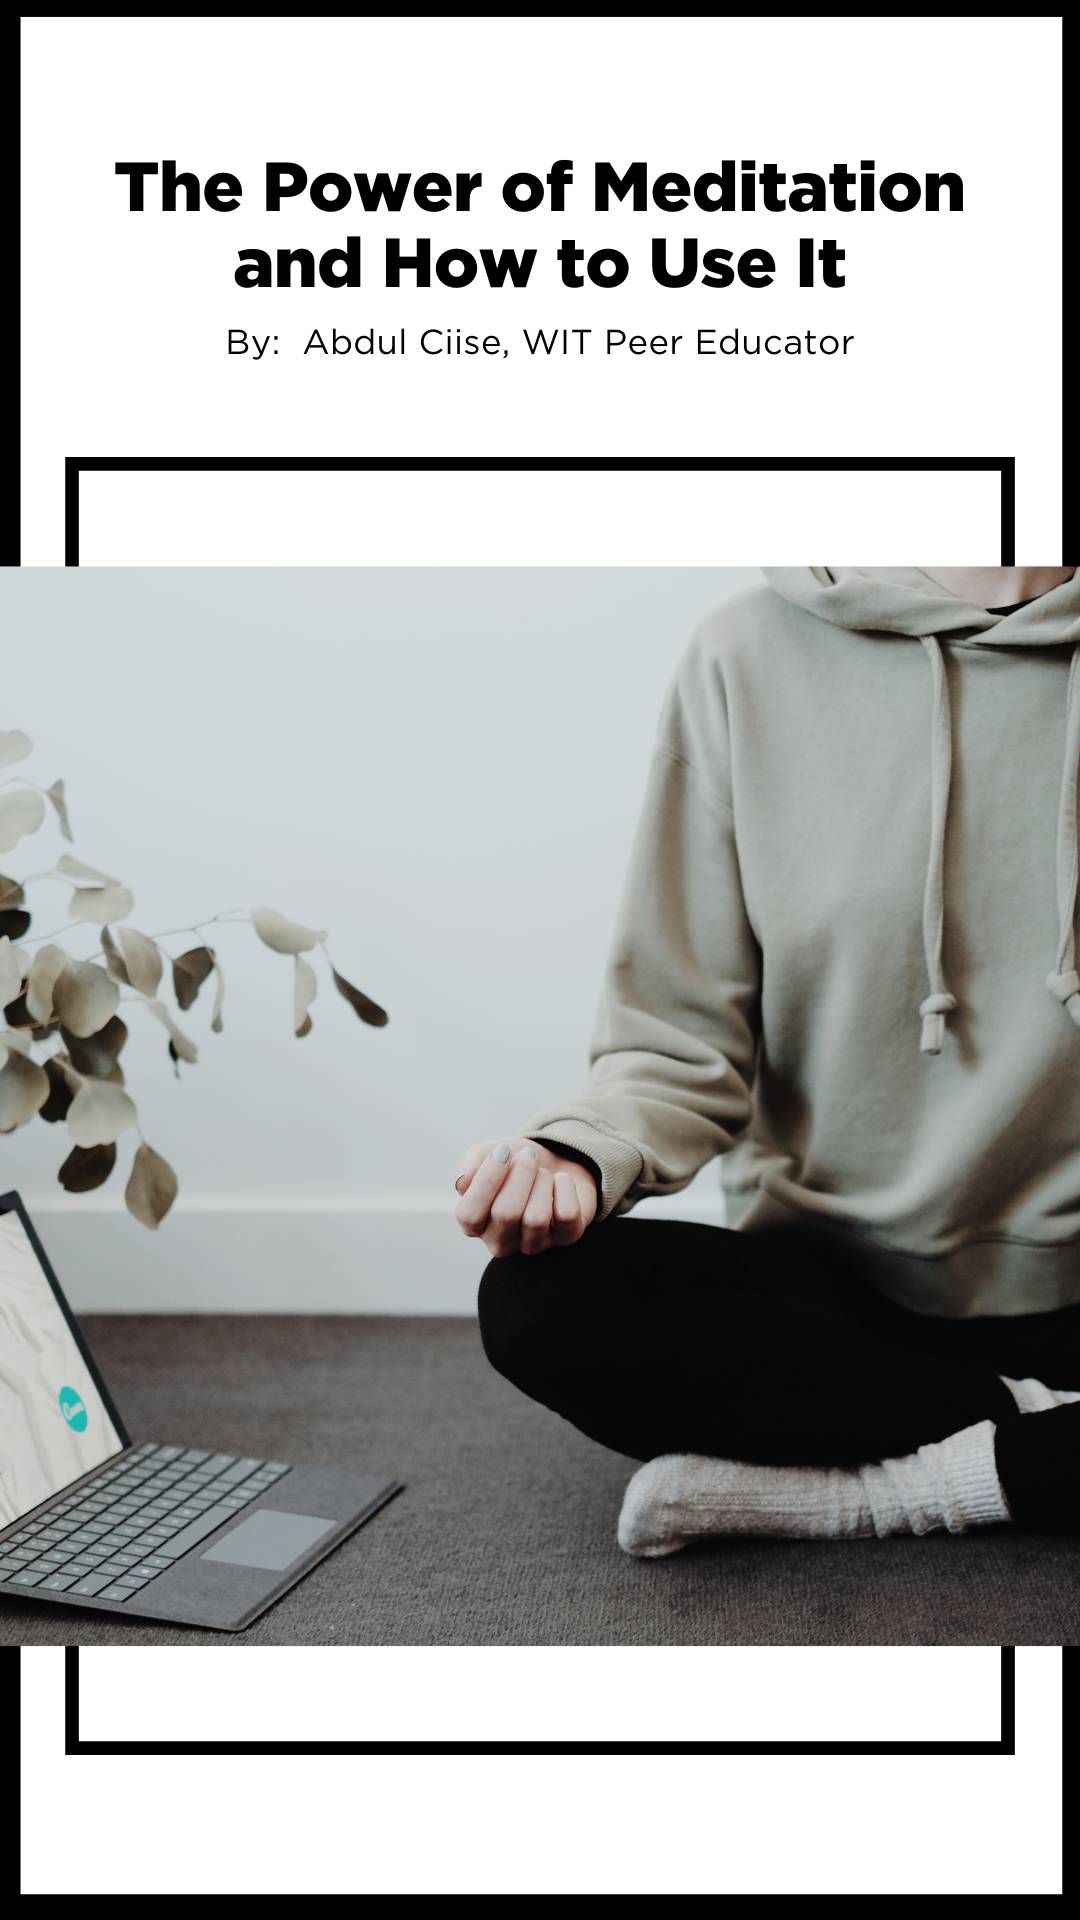 Image of a person meditating in comfy clothes by an open computer.